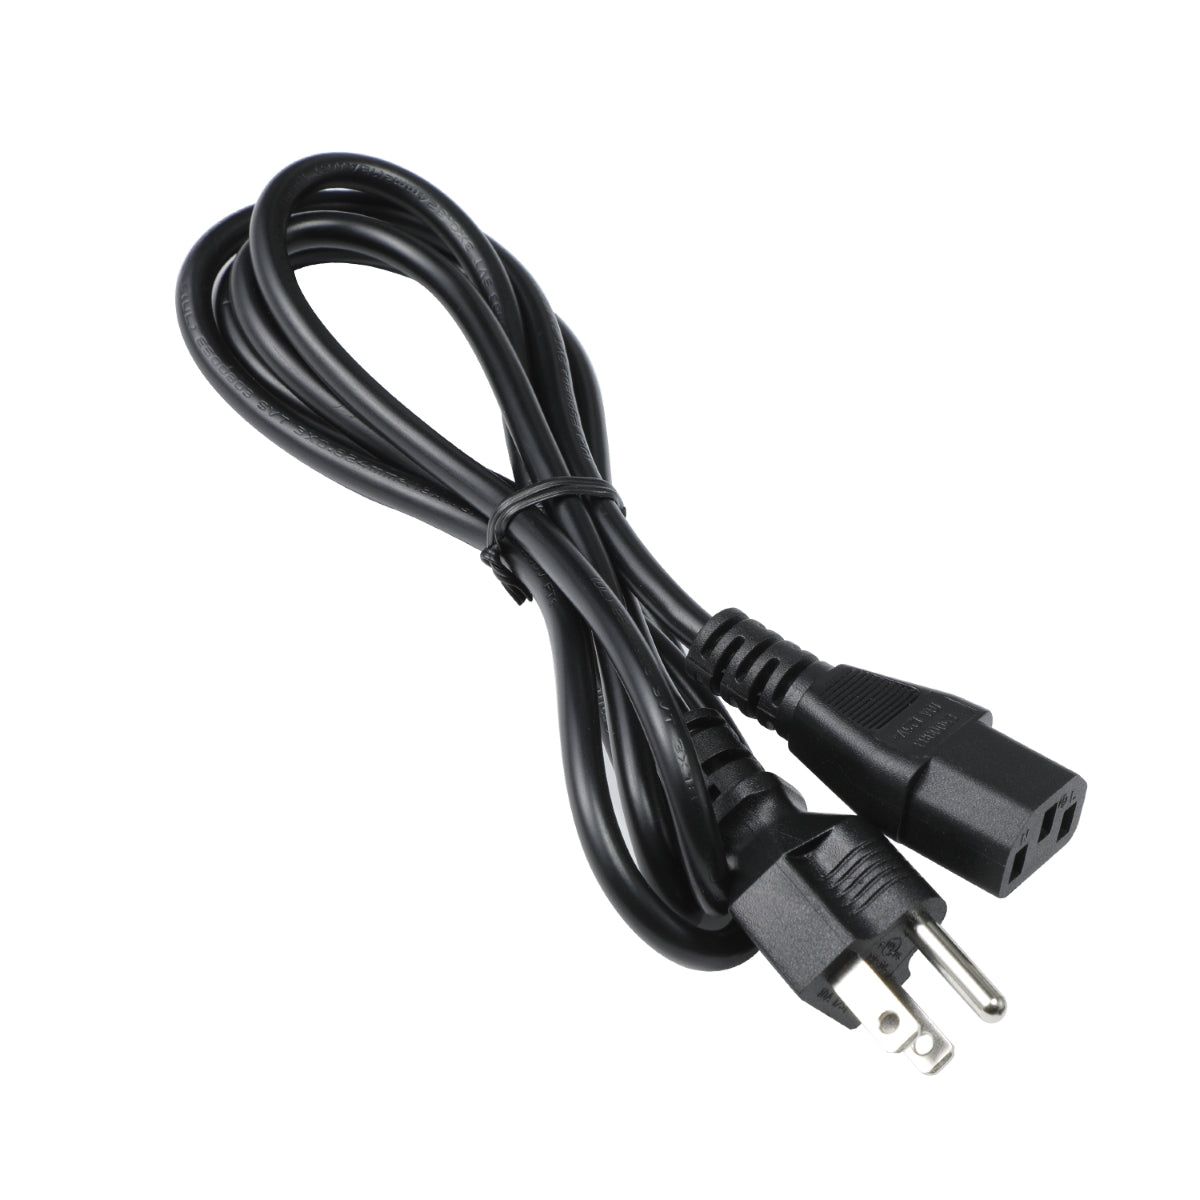 Power Cord for AOC G2460FQ Monitor.